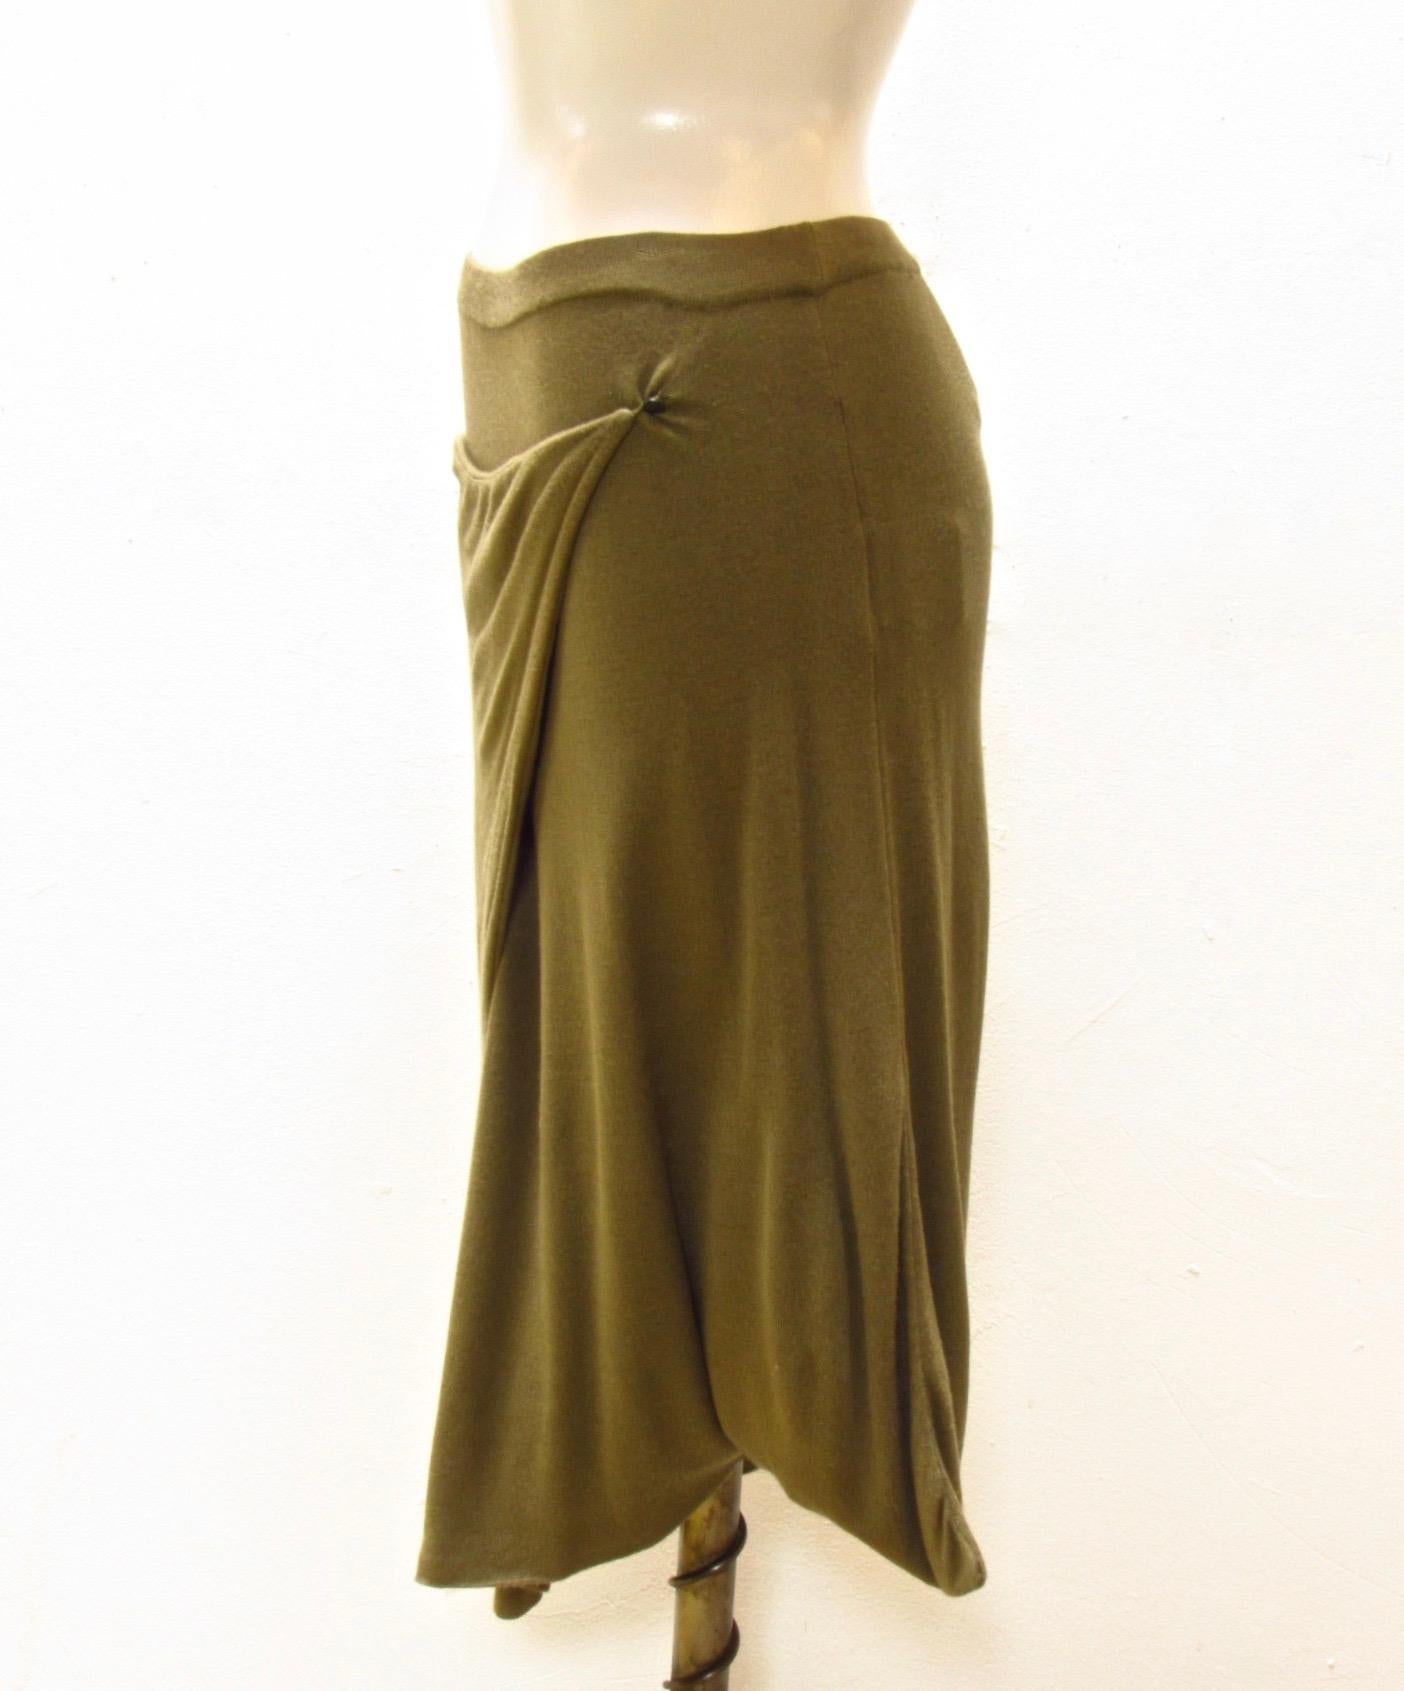 This soft rayon knit skirt comes in an earthy olive color from Maison Martin Margiela. The faux wrap front secures with a small button. 